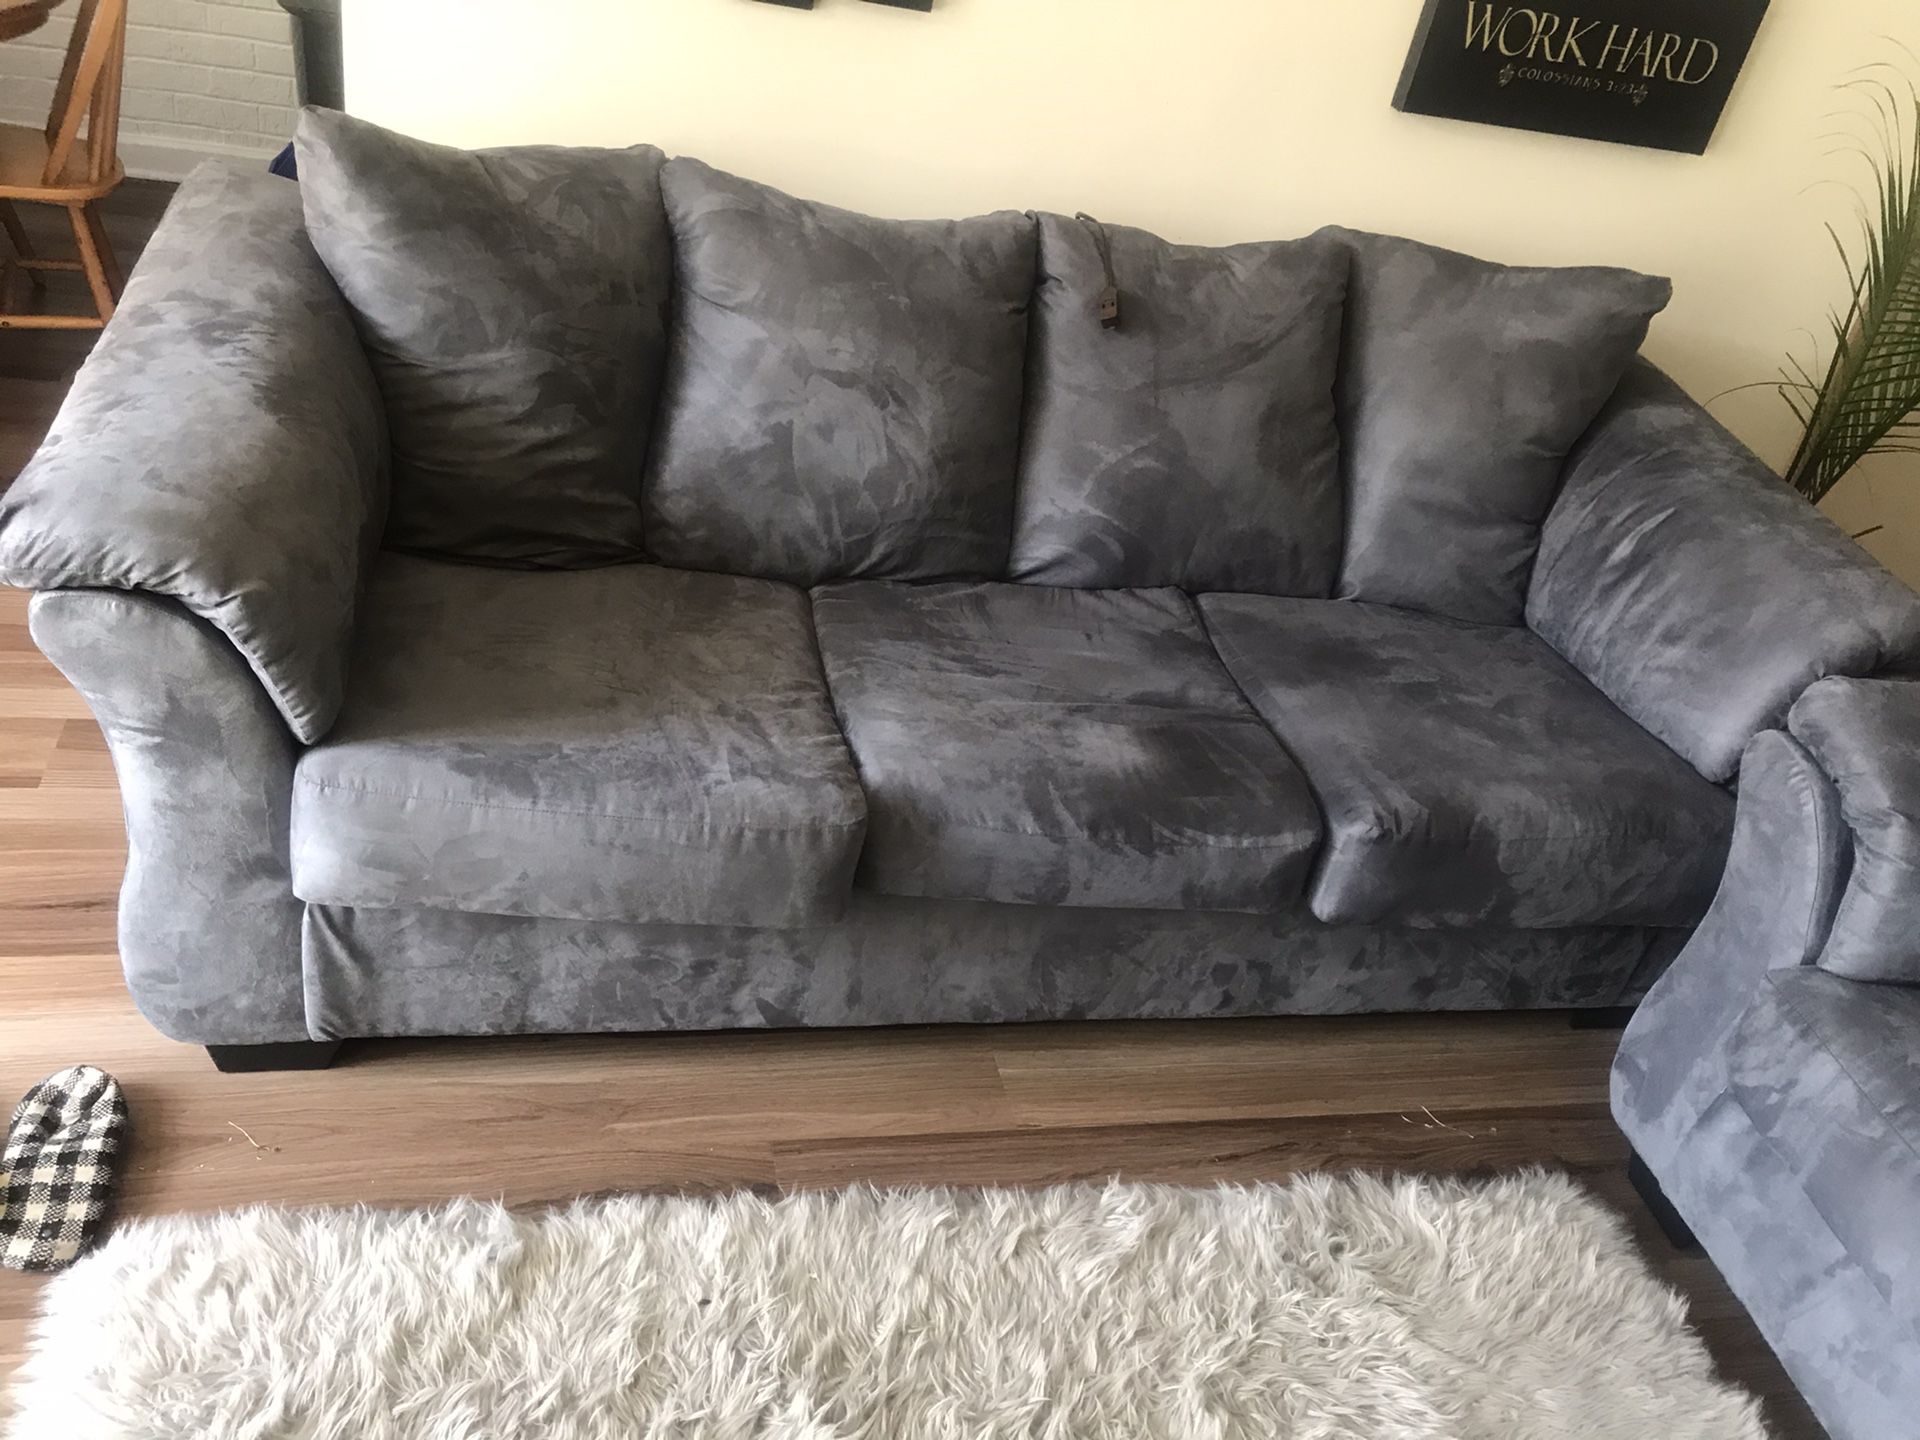 Furniture for sale, couch, love seat